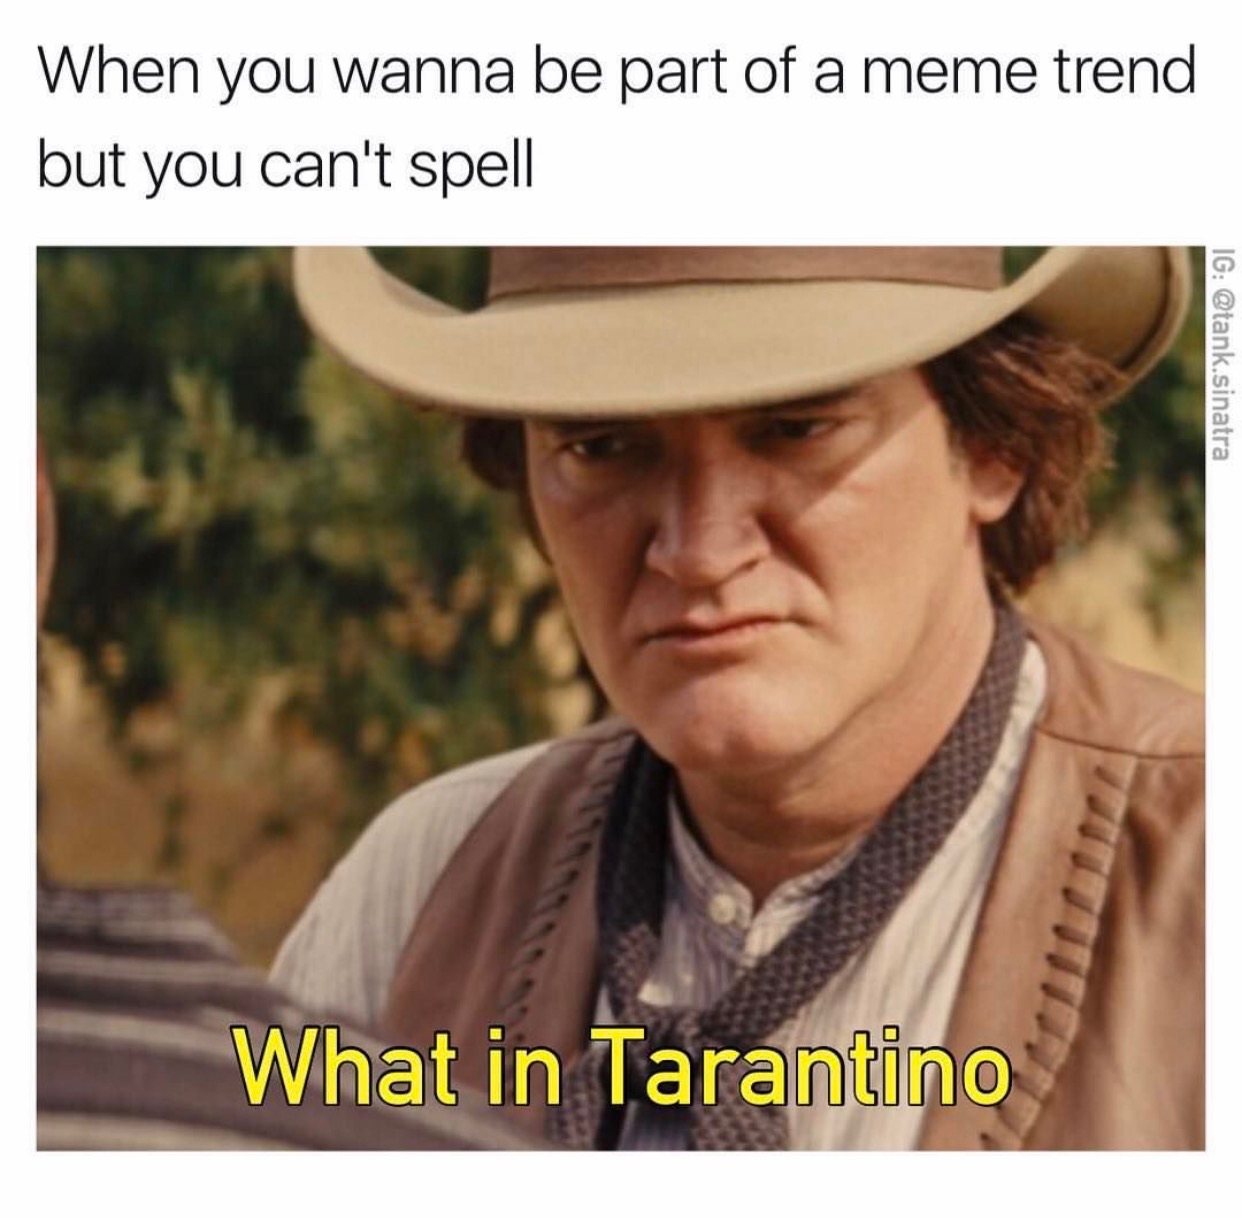 quentin tarantino django - When you wanna be part of a meme trend but you can't spell Ig .sinatra What in Tarantino